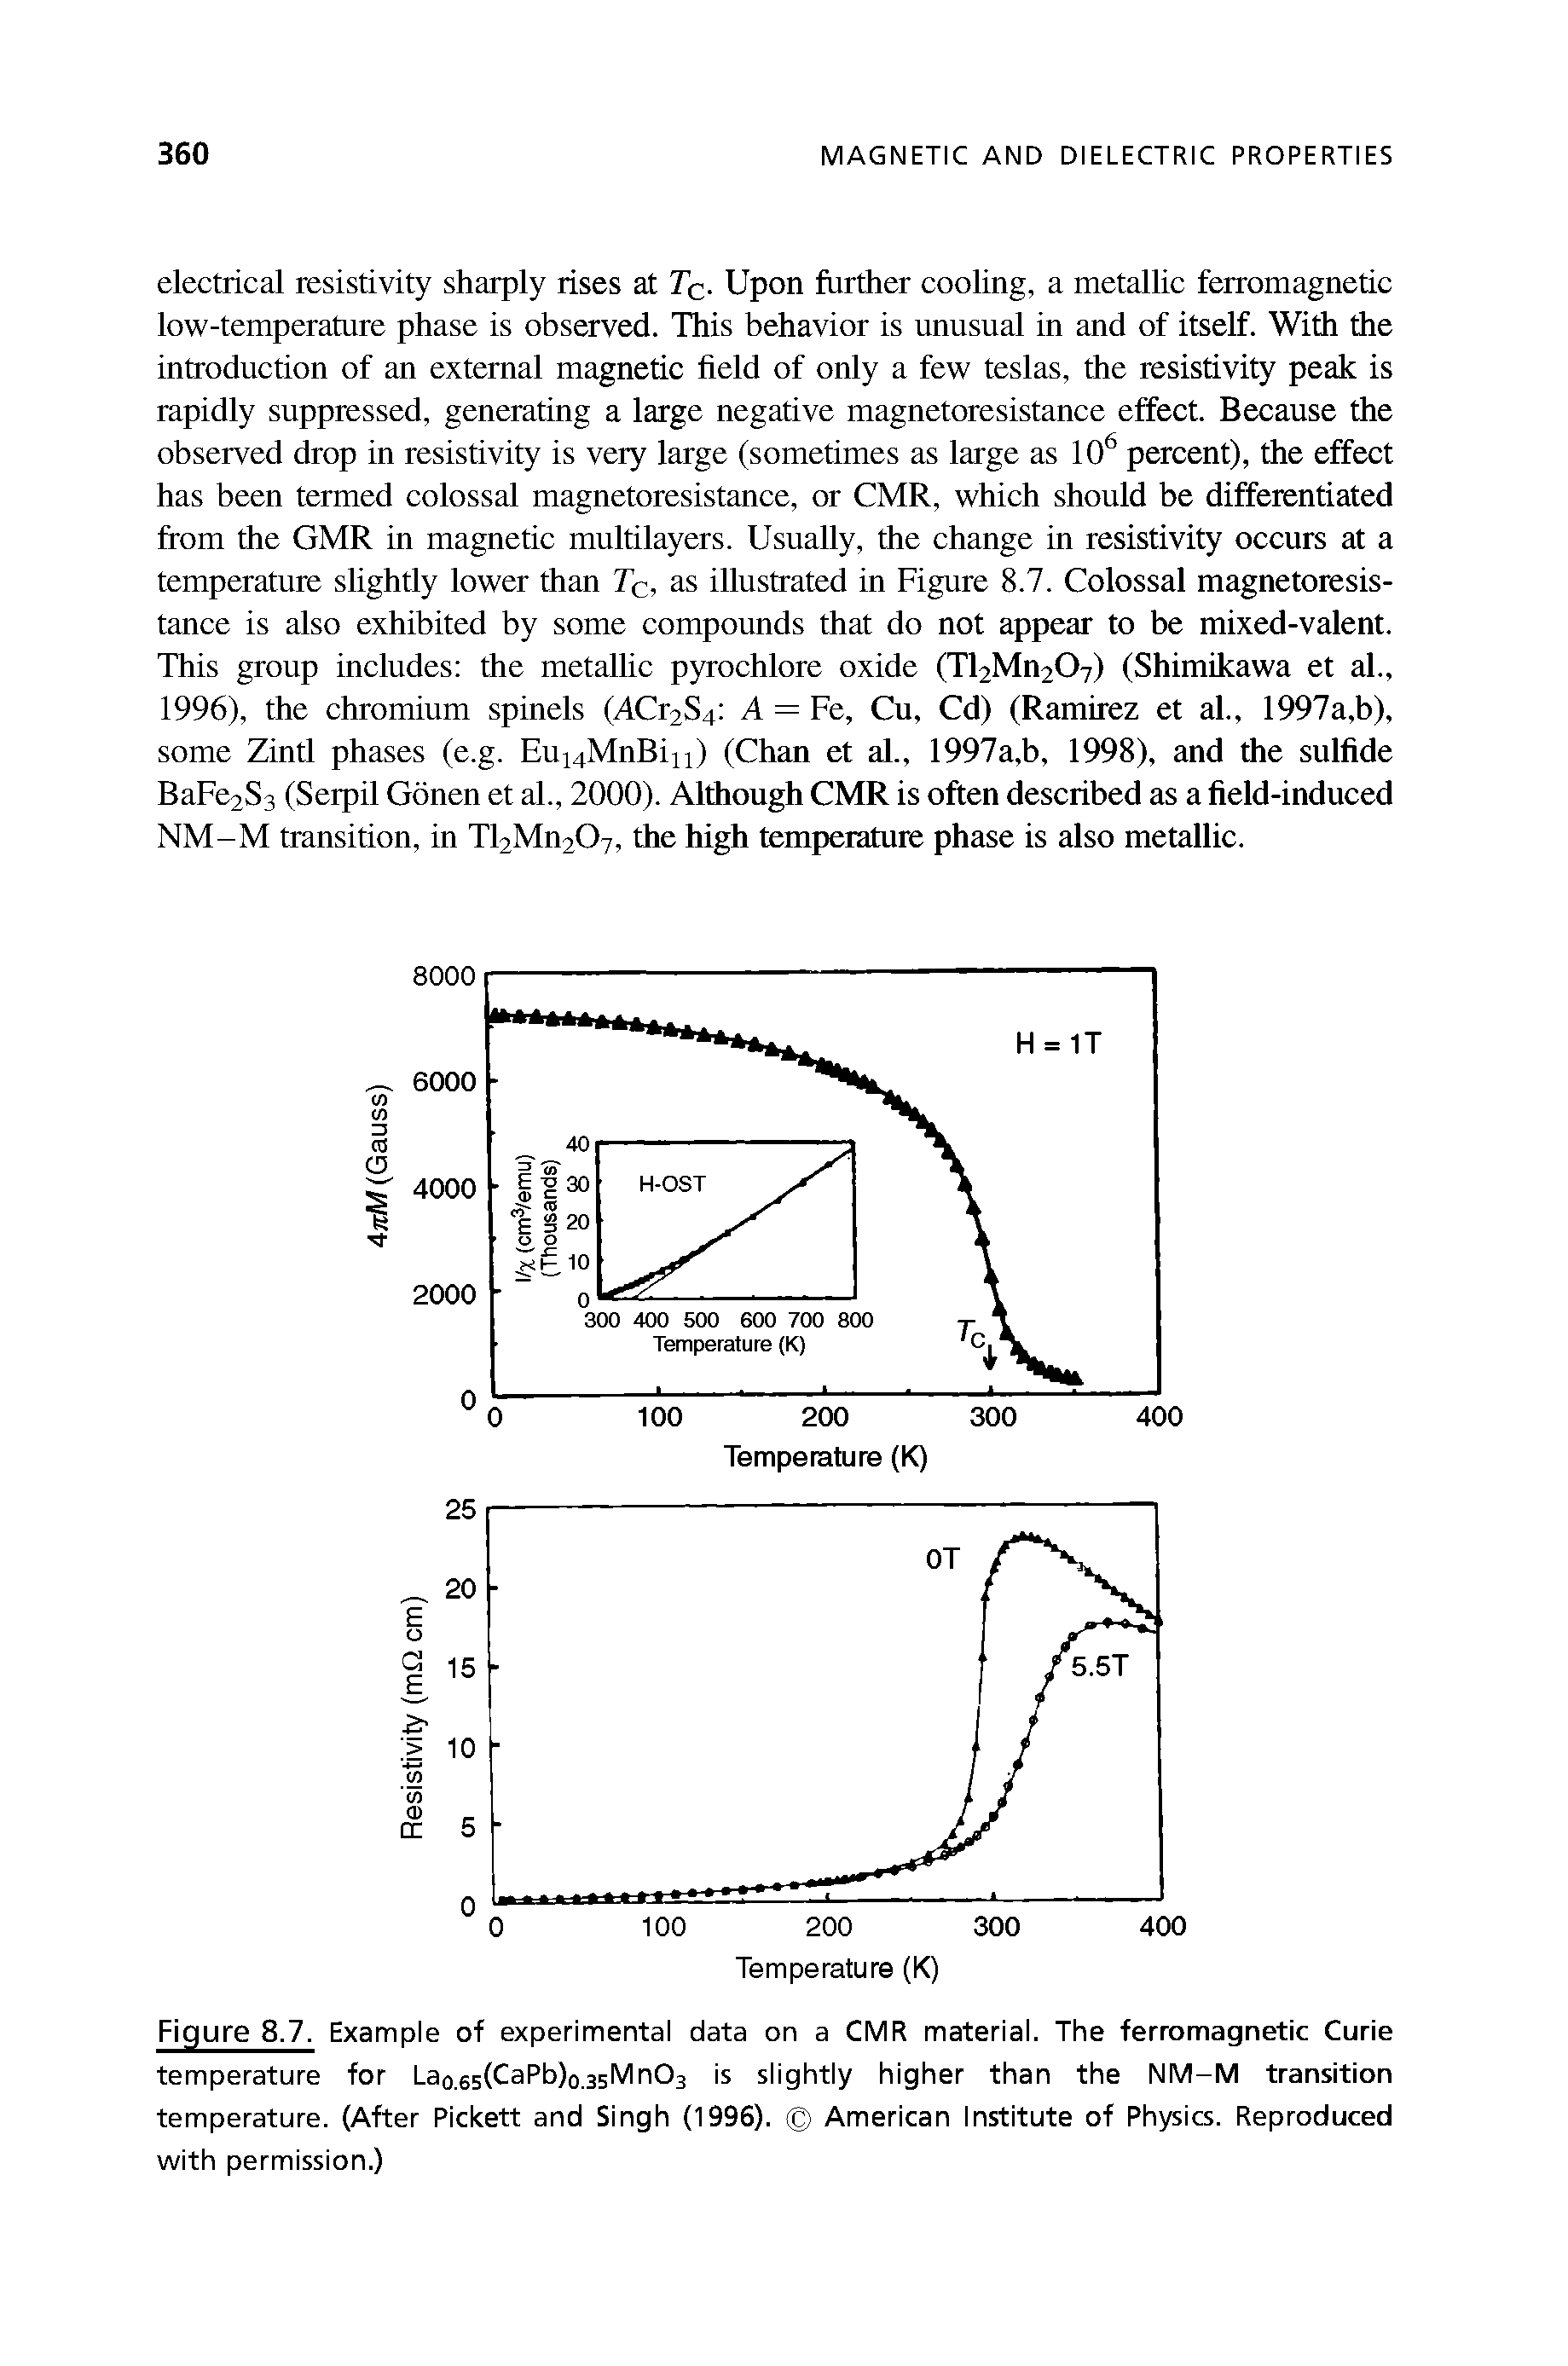 Figure 8.7. Example of experimental data on a CMR material. The ferromagnetic Curie temperature for Lao.65(CaPb)o.35Mn03 is slightly higher than the NM-M transition temperature. (After Pickett and Singh (1996). American Institute of Physics. Reproduced with permission.)...